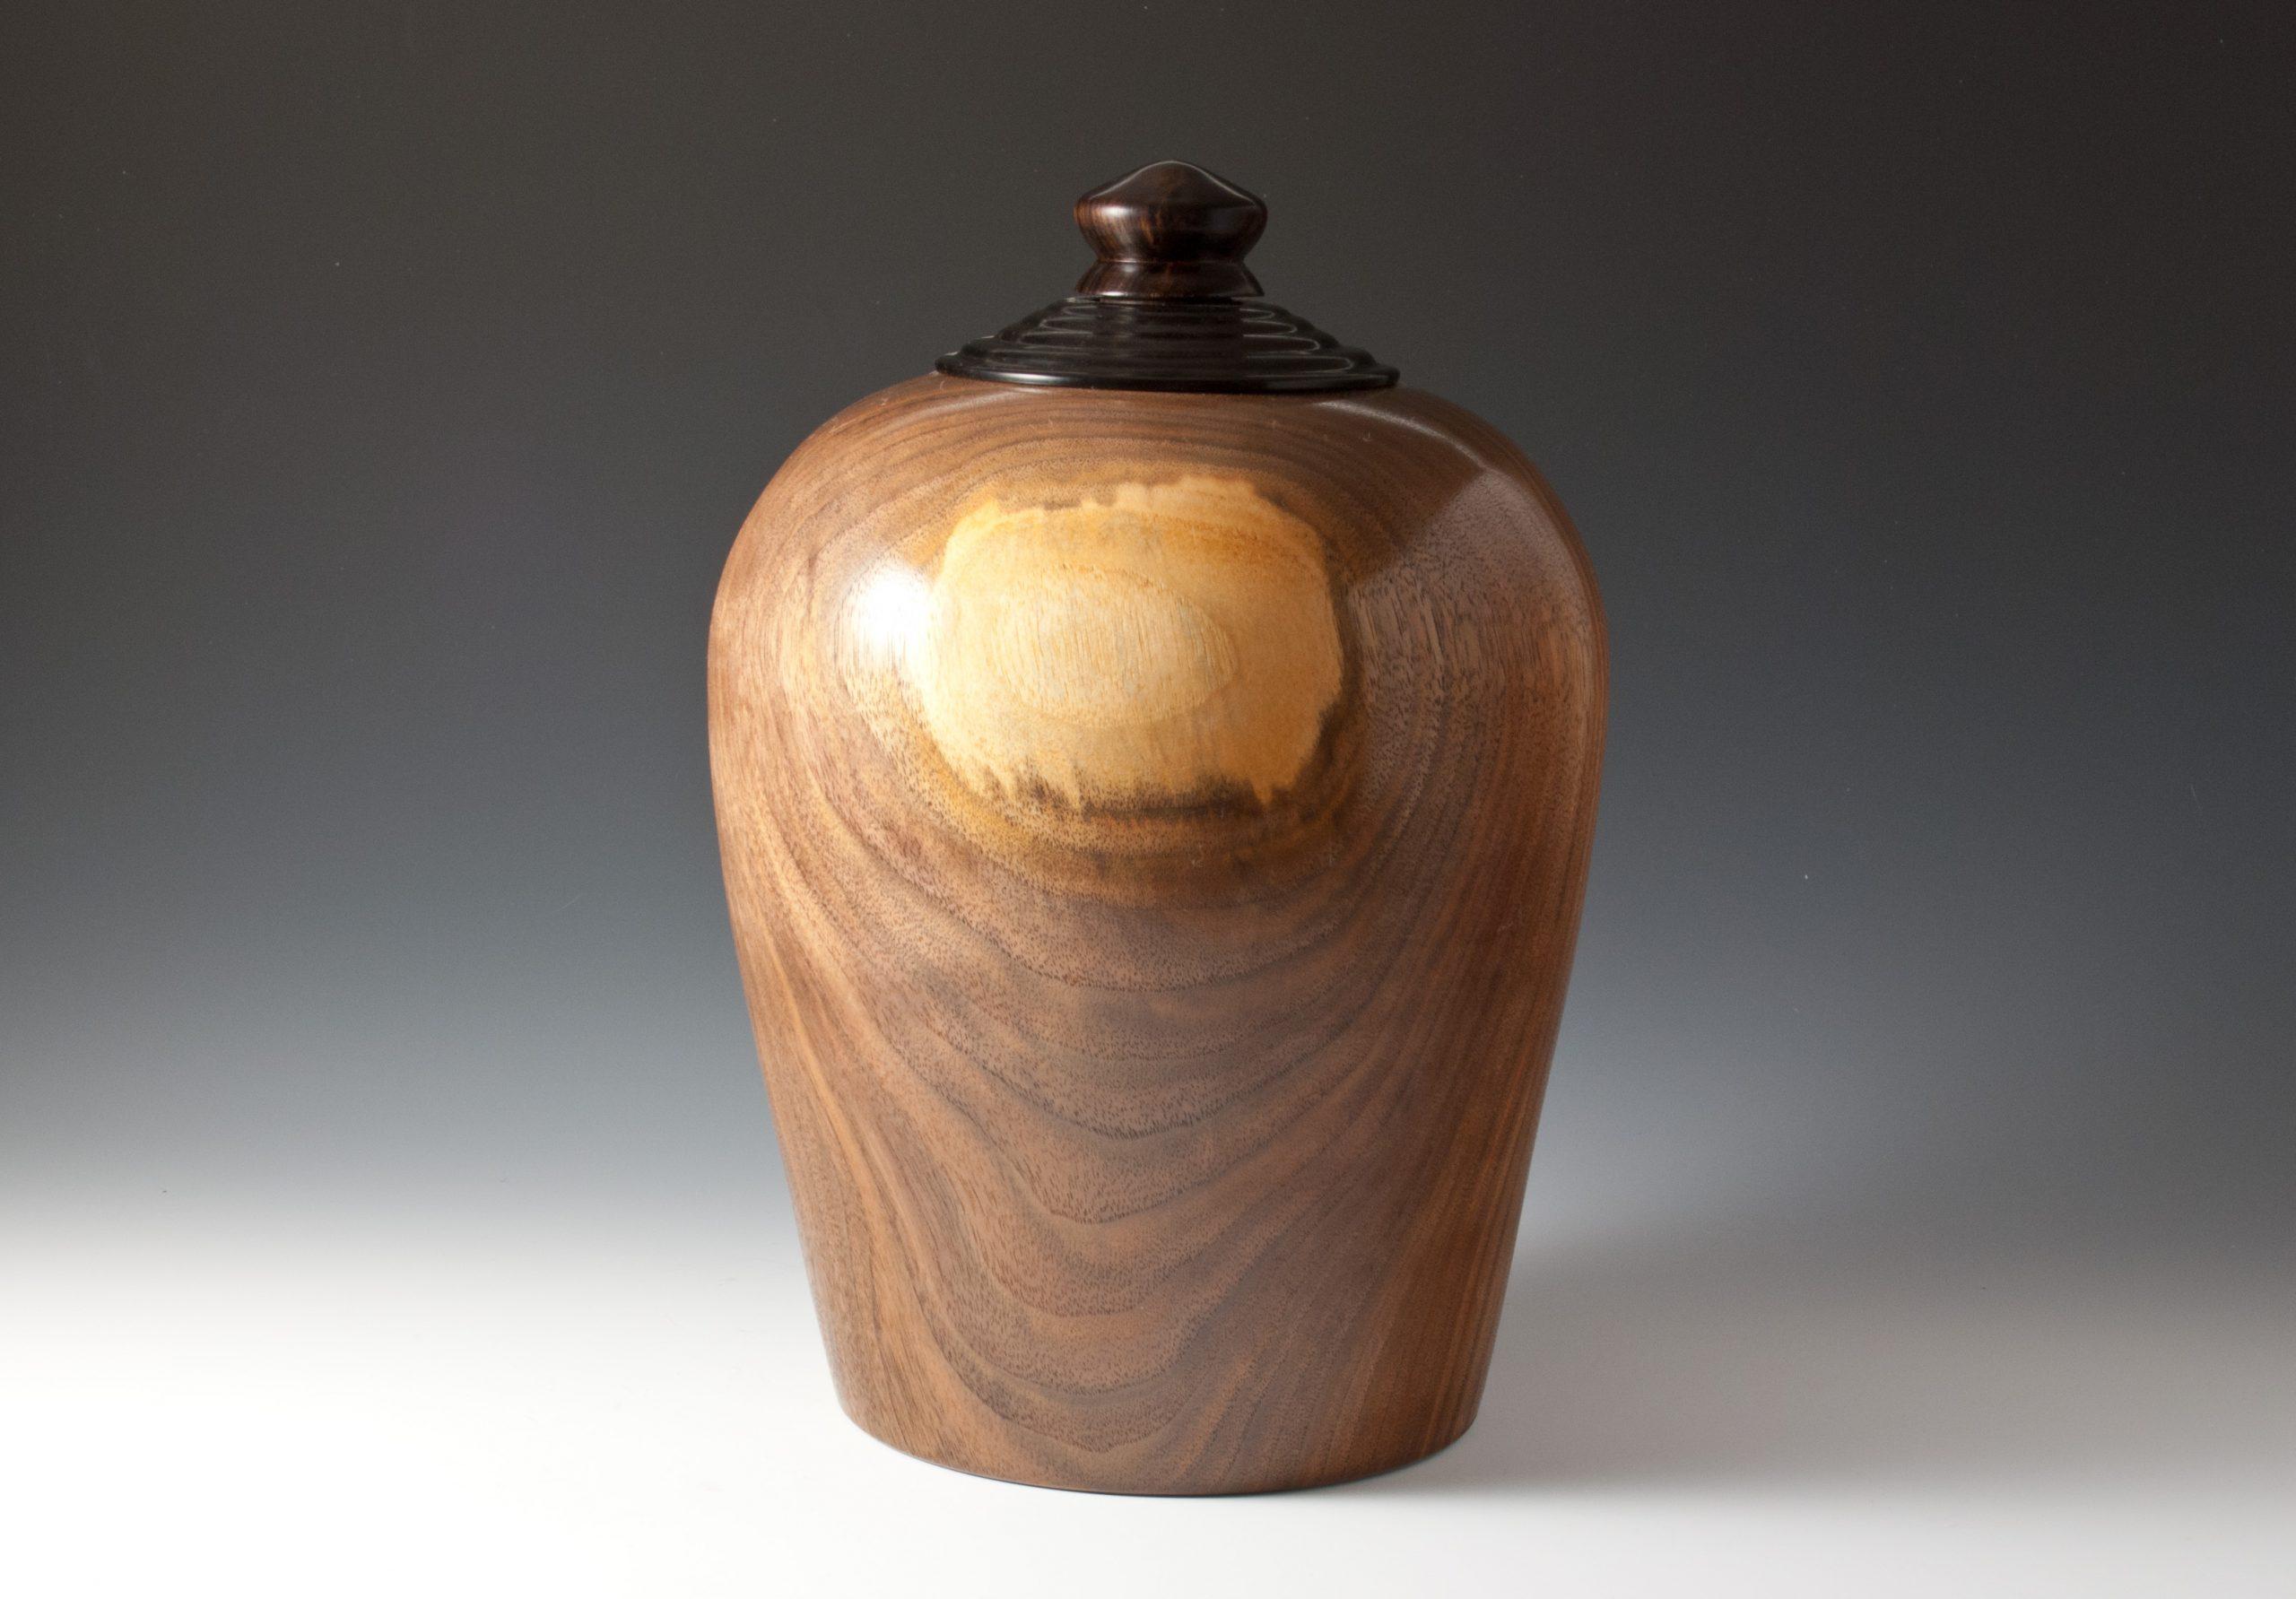 Custom Turned Urns | Handcrafted Wooden Urns by David Swiger